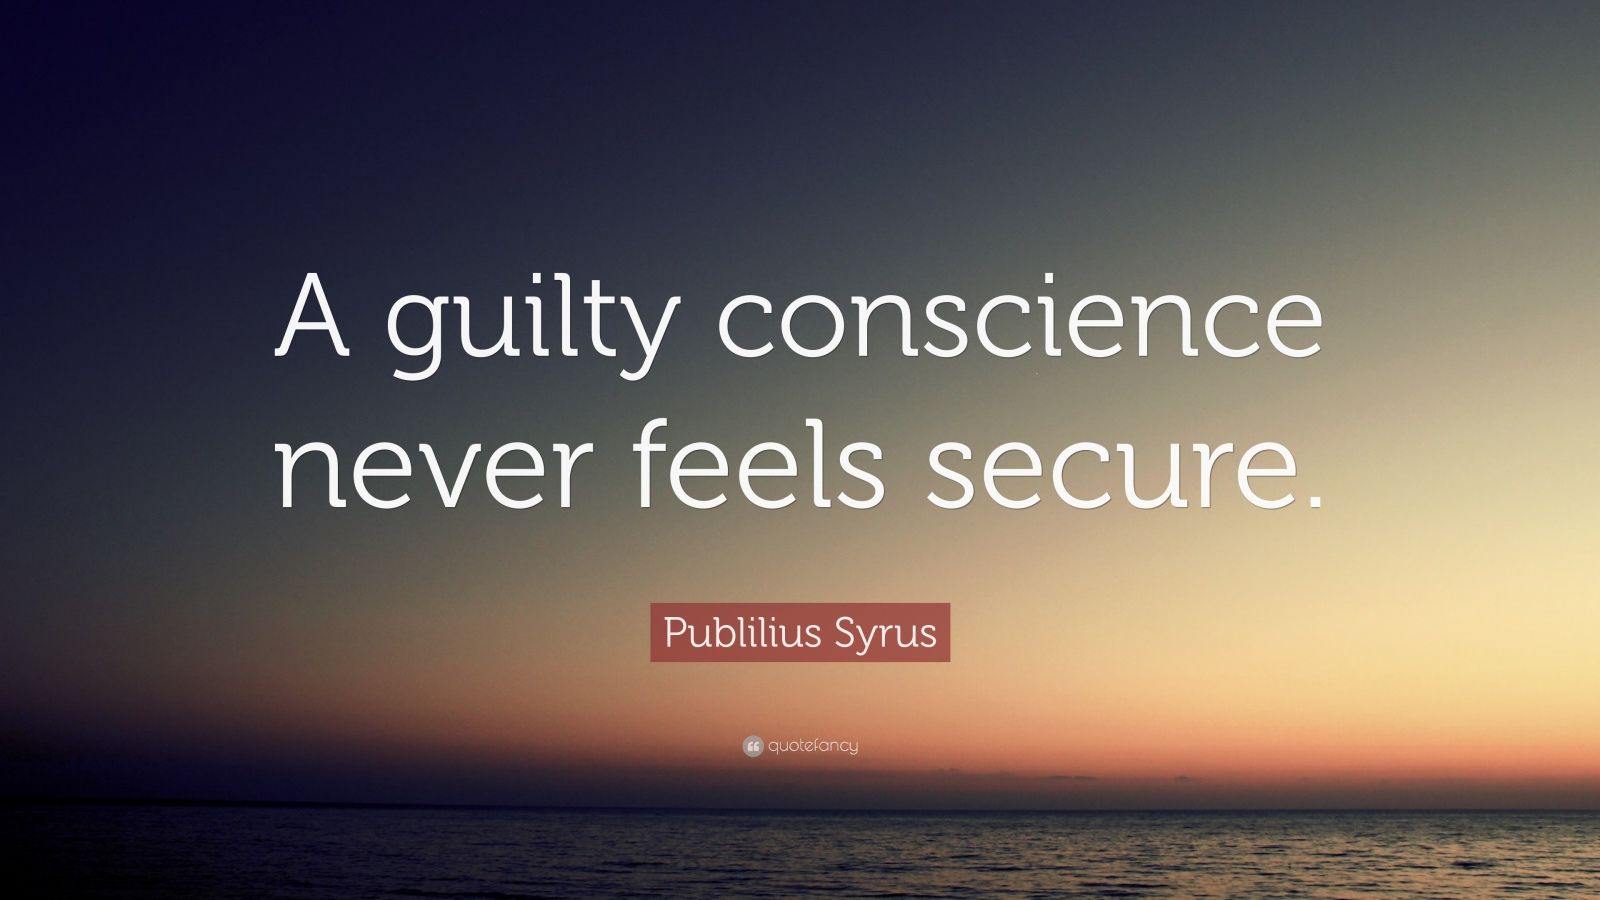 Publilius Syrus Quote: “A guilty conscience never feels secure.” (12 ...